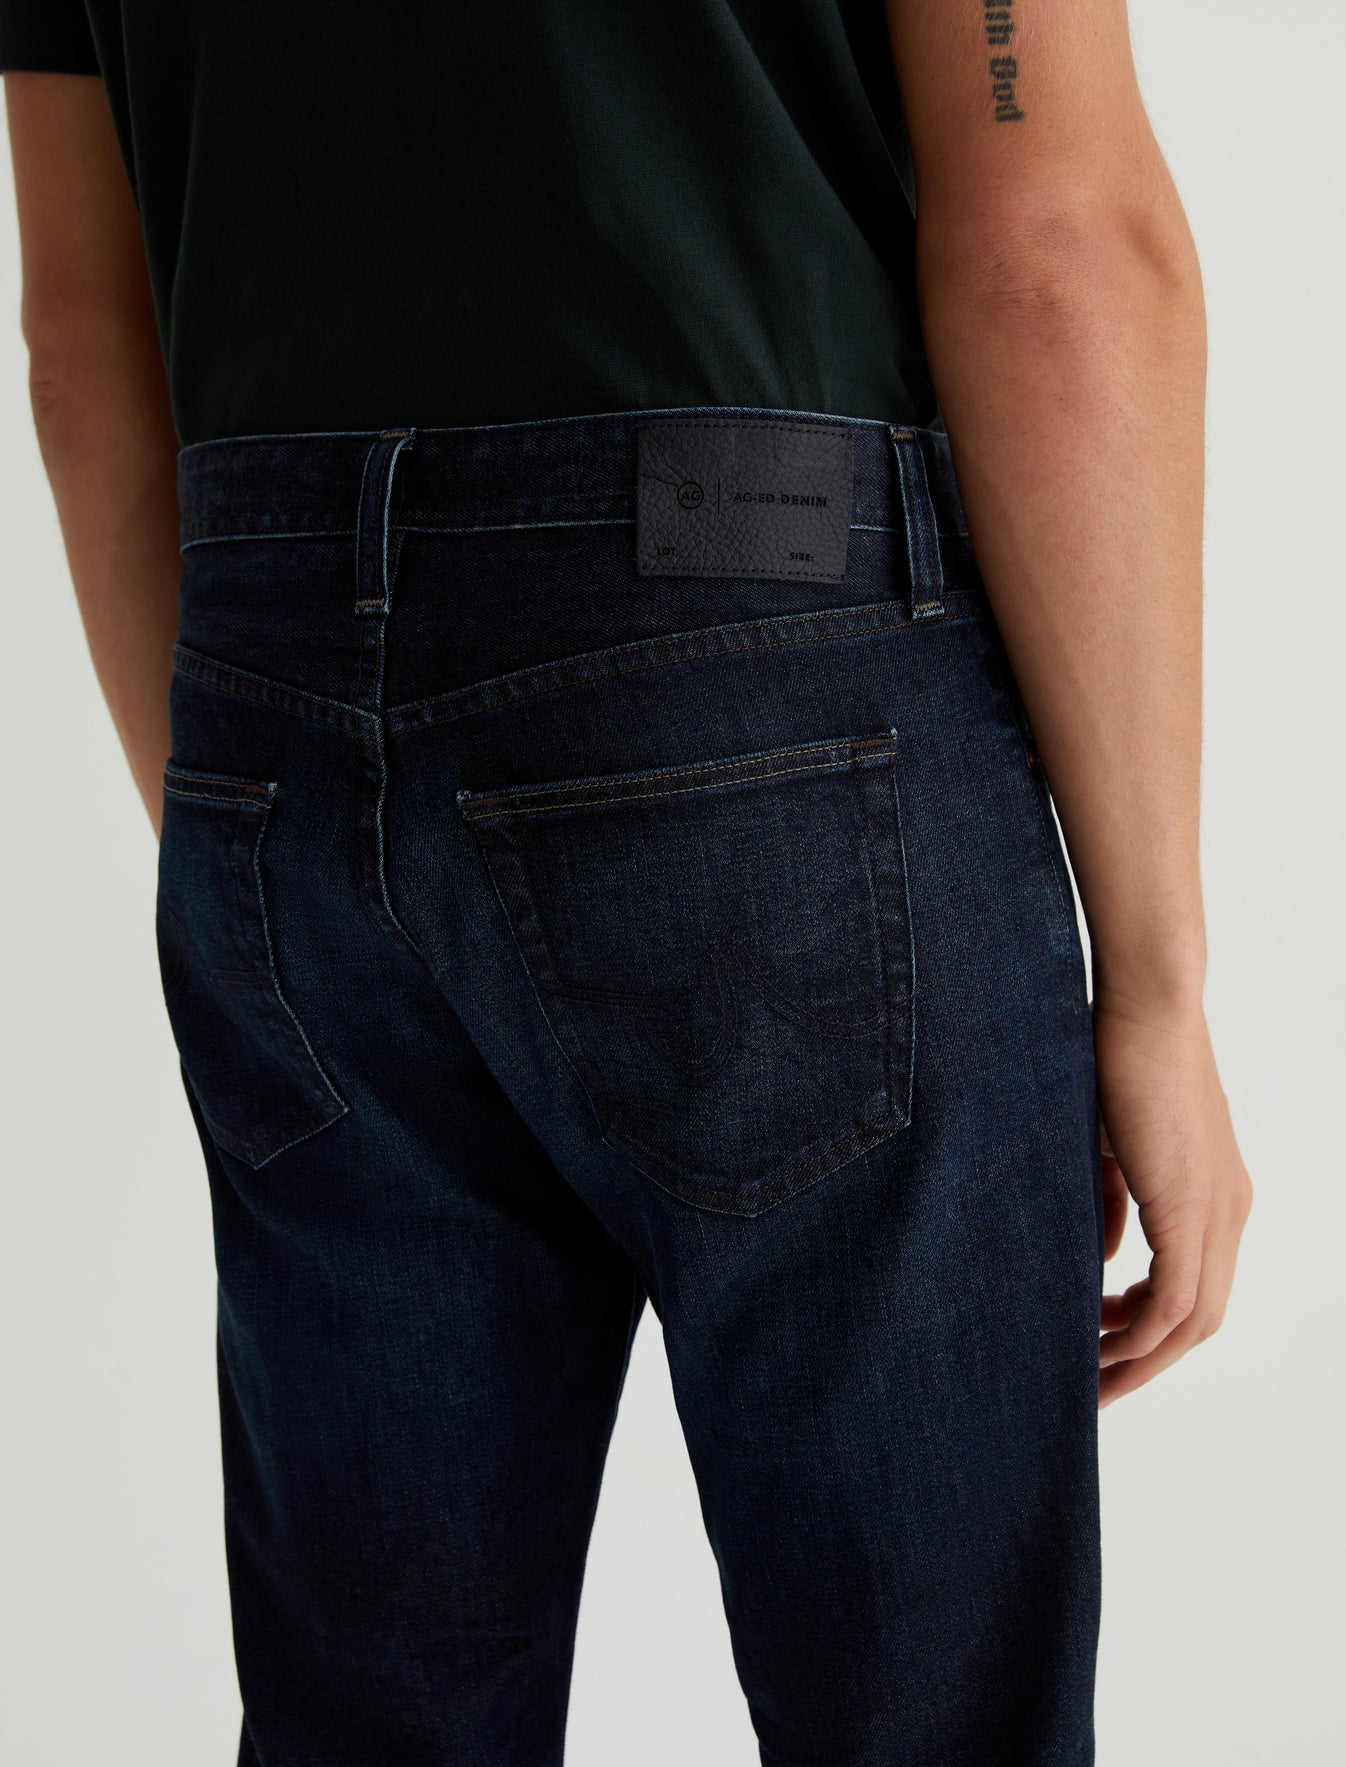 Mens Everett AG Official Years Store Jeans 3 at Holzer